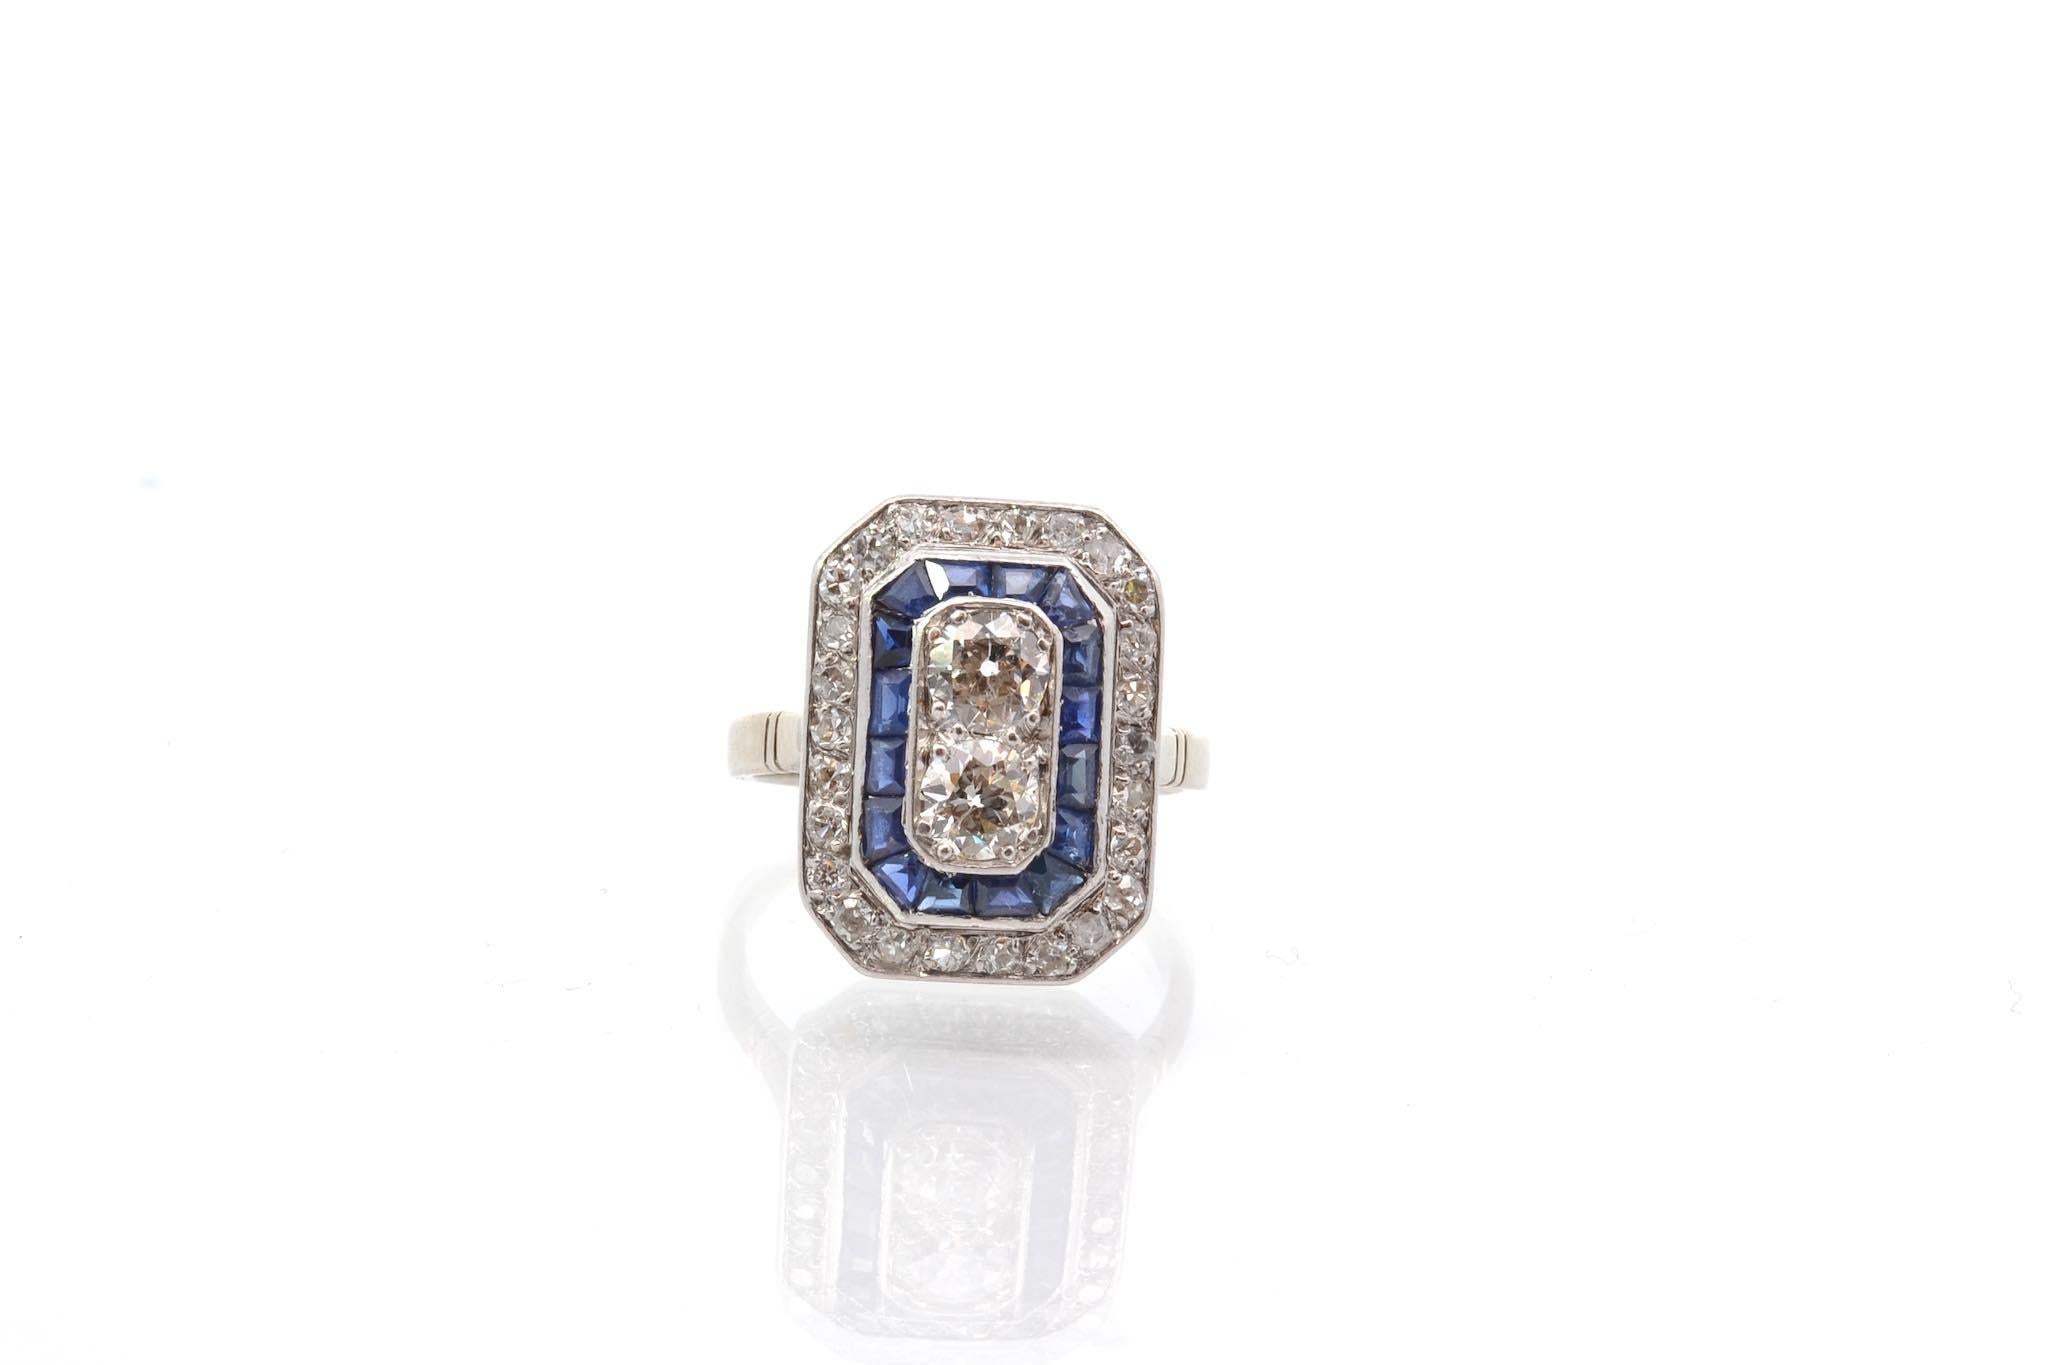 Stones: 2 diamonds: 0.90 ct, 26 diamonds cut 8×8: 0.45 ct and 16 calibrated sapphires: 0.80 ct
Material: Gold and platinum
Weight: 5.4g
Dimensions: 1.8 x 1.3cm
Period: 1920
Size: 52 (free sizing)
Certificate
Ref. :25642